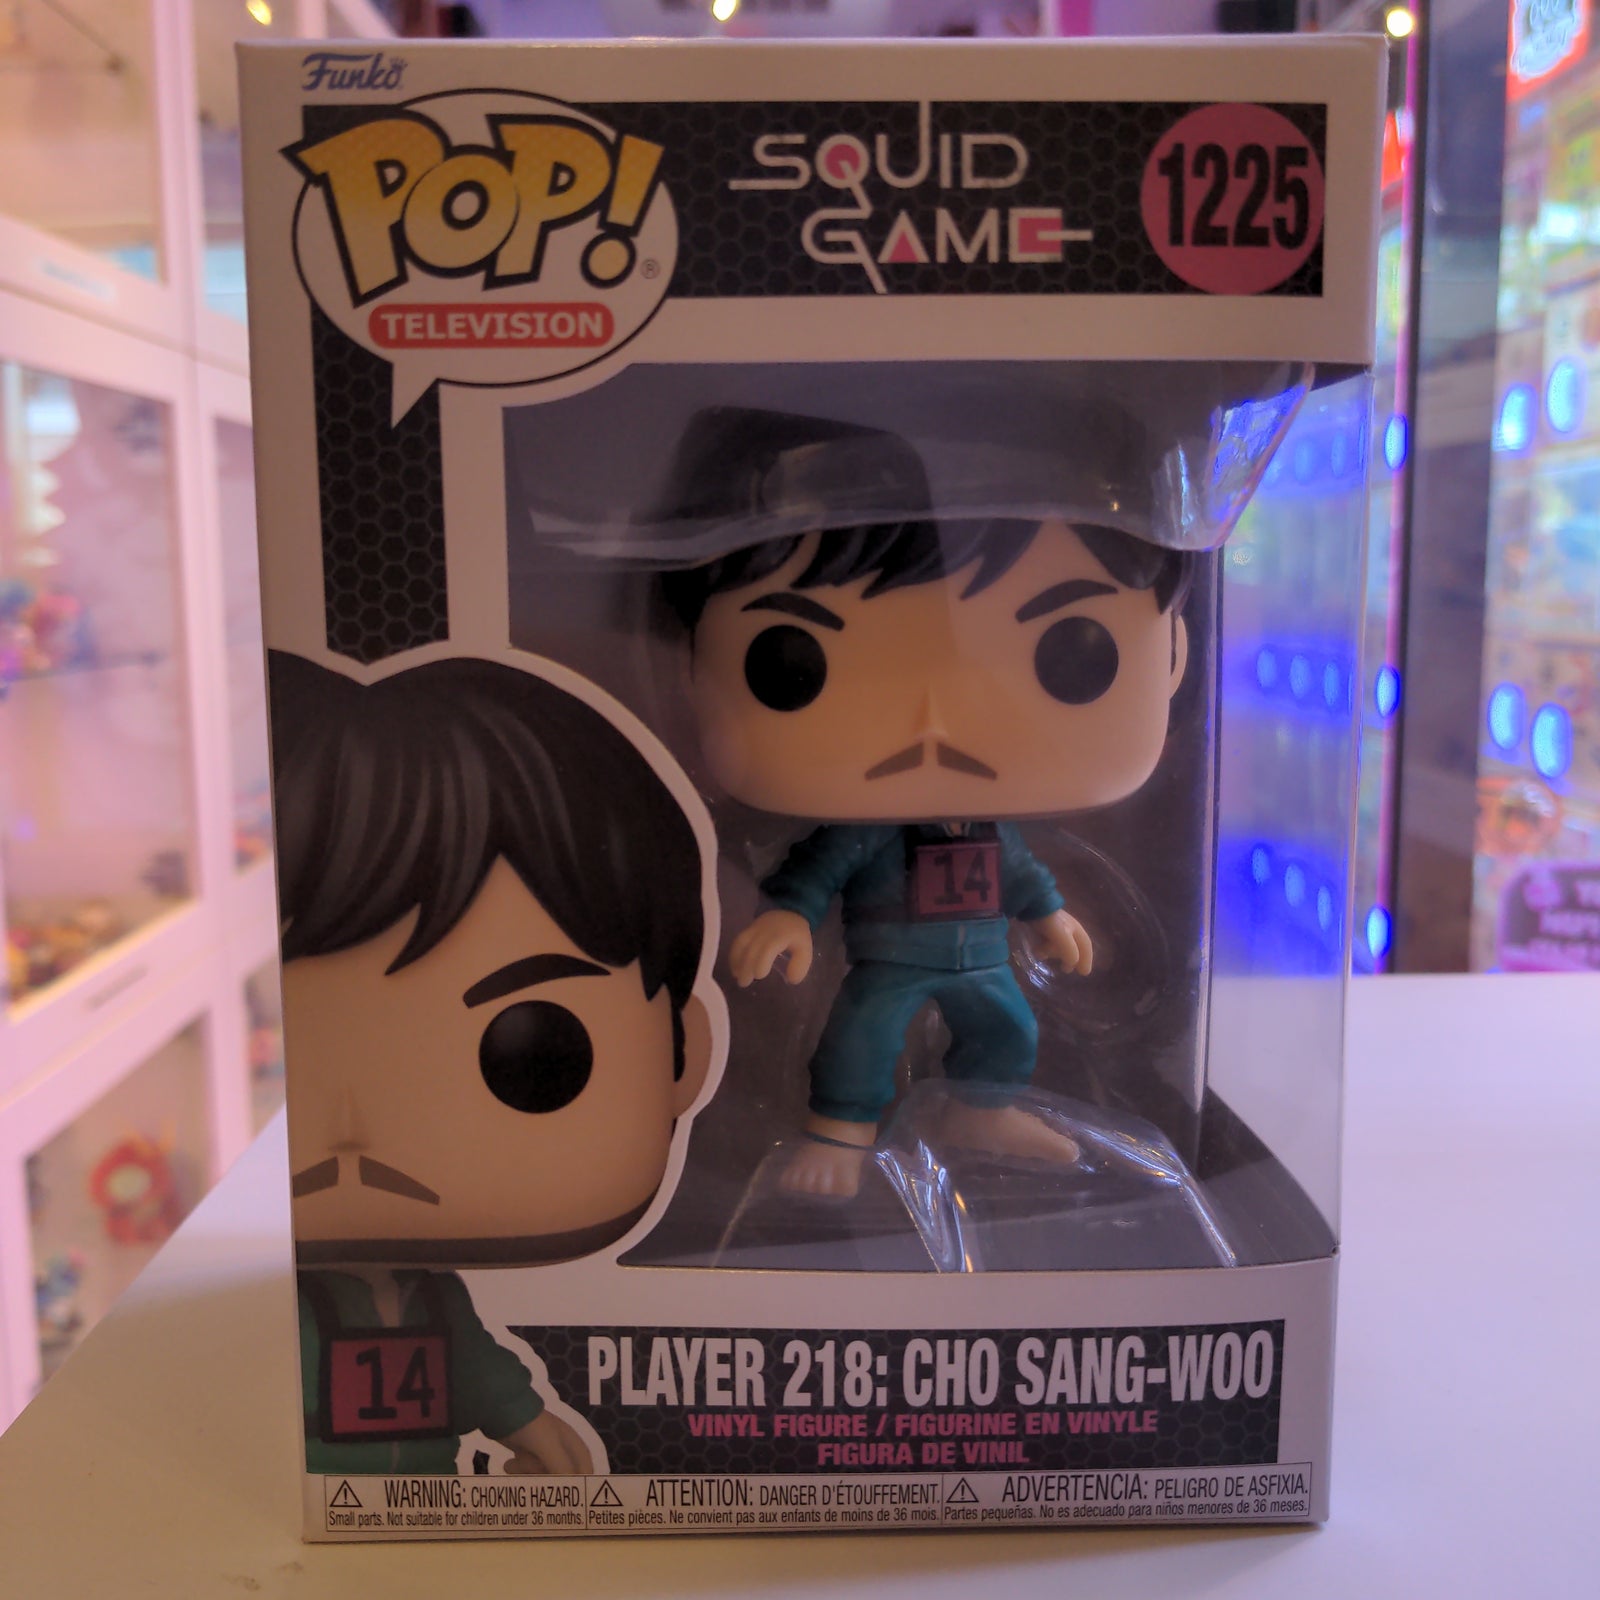 Player 218: Cho Sang-Woo - Squid Game POP! by Funko